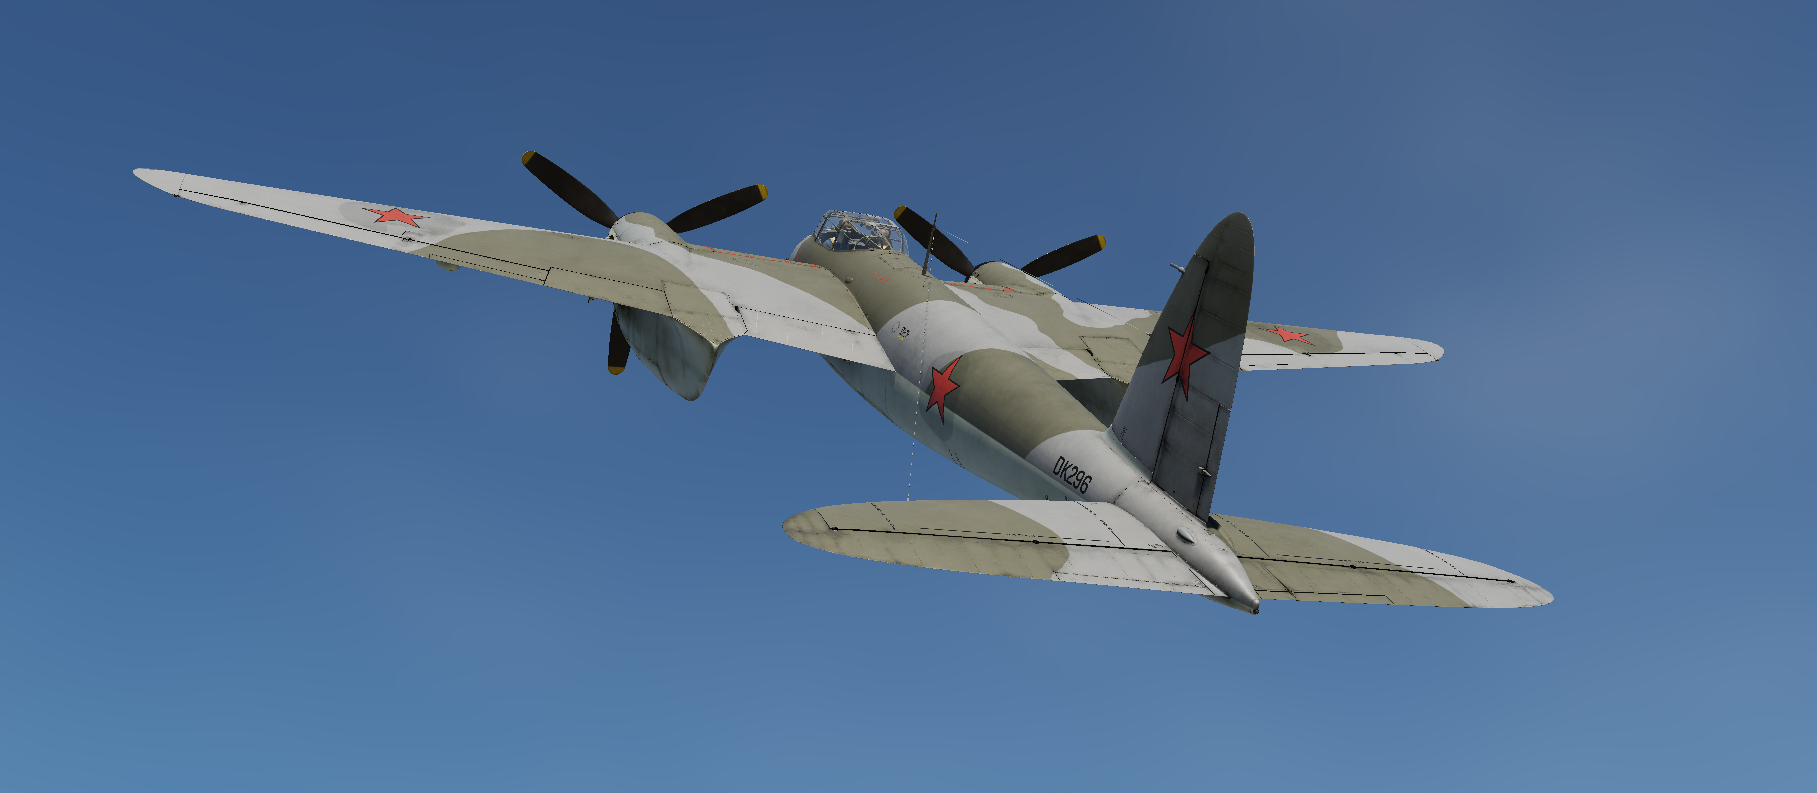 Mosquito, USSR DK296 *UPDATED*